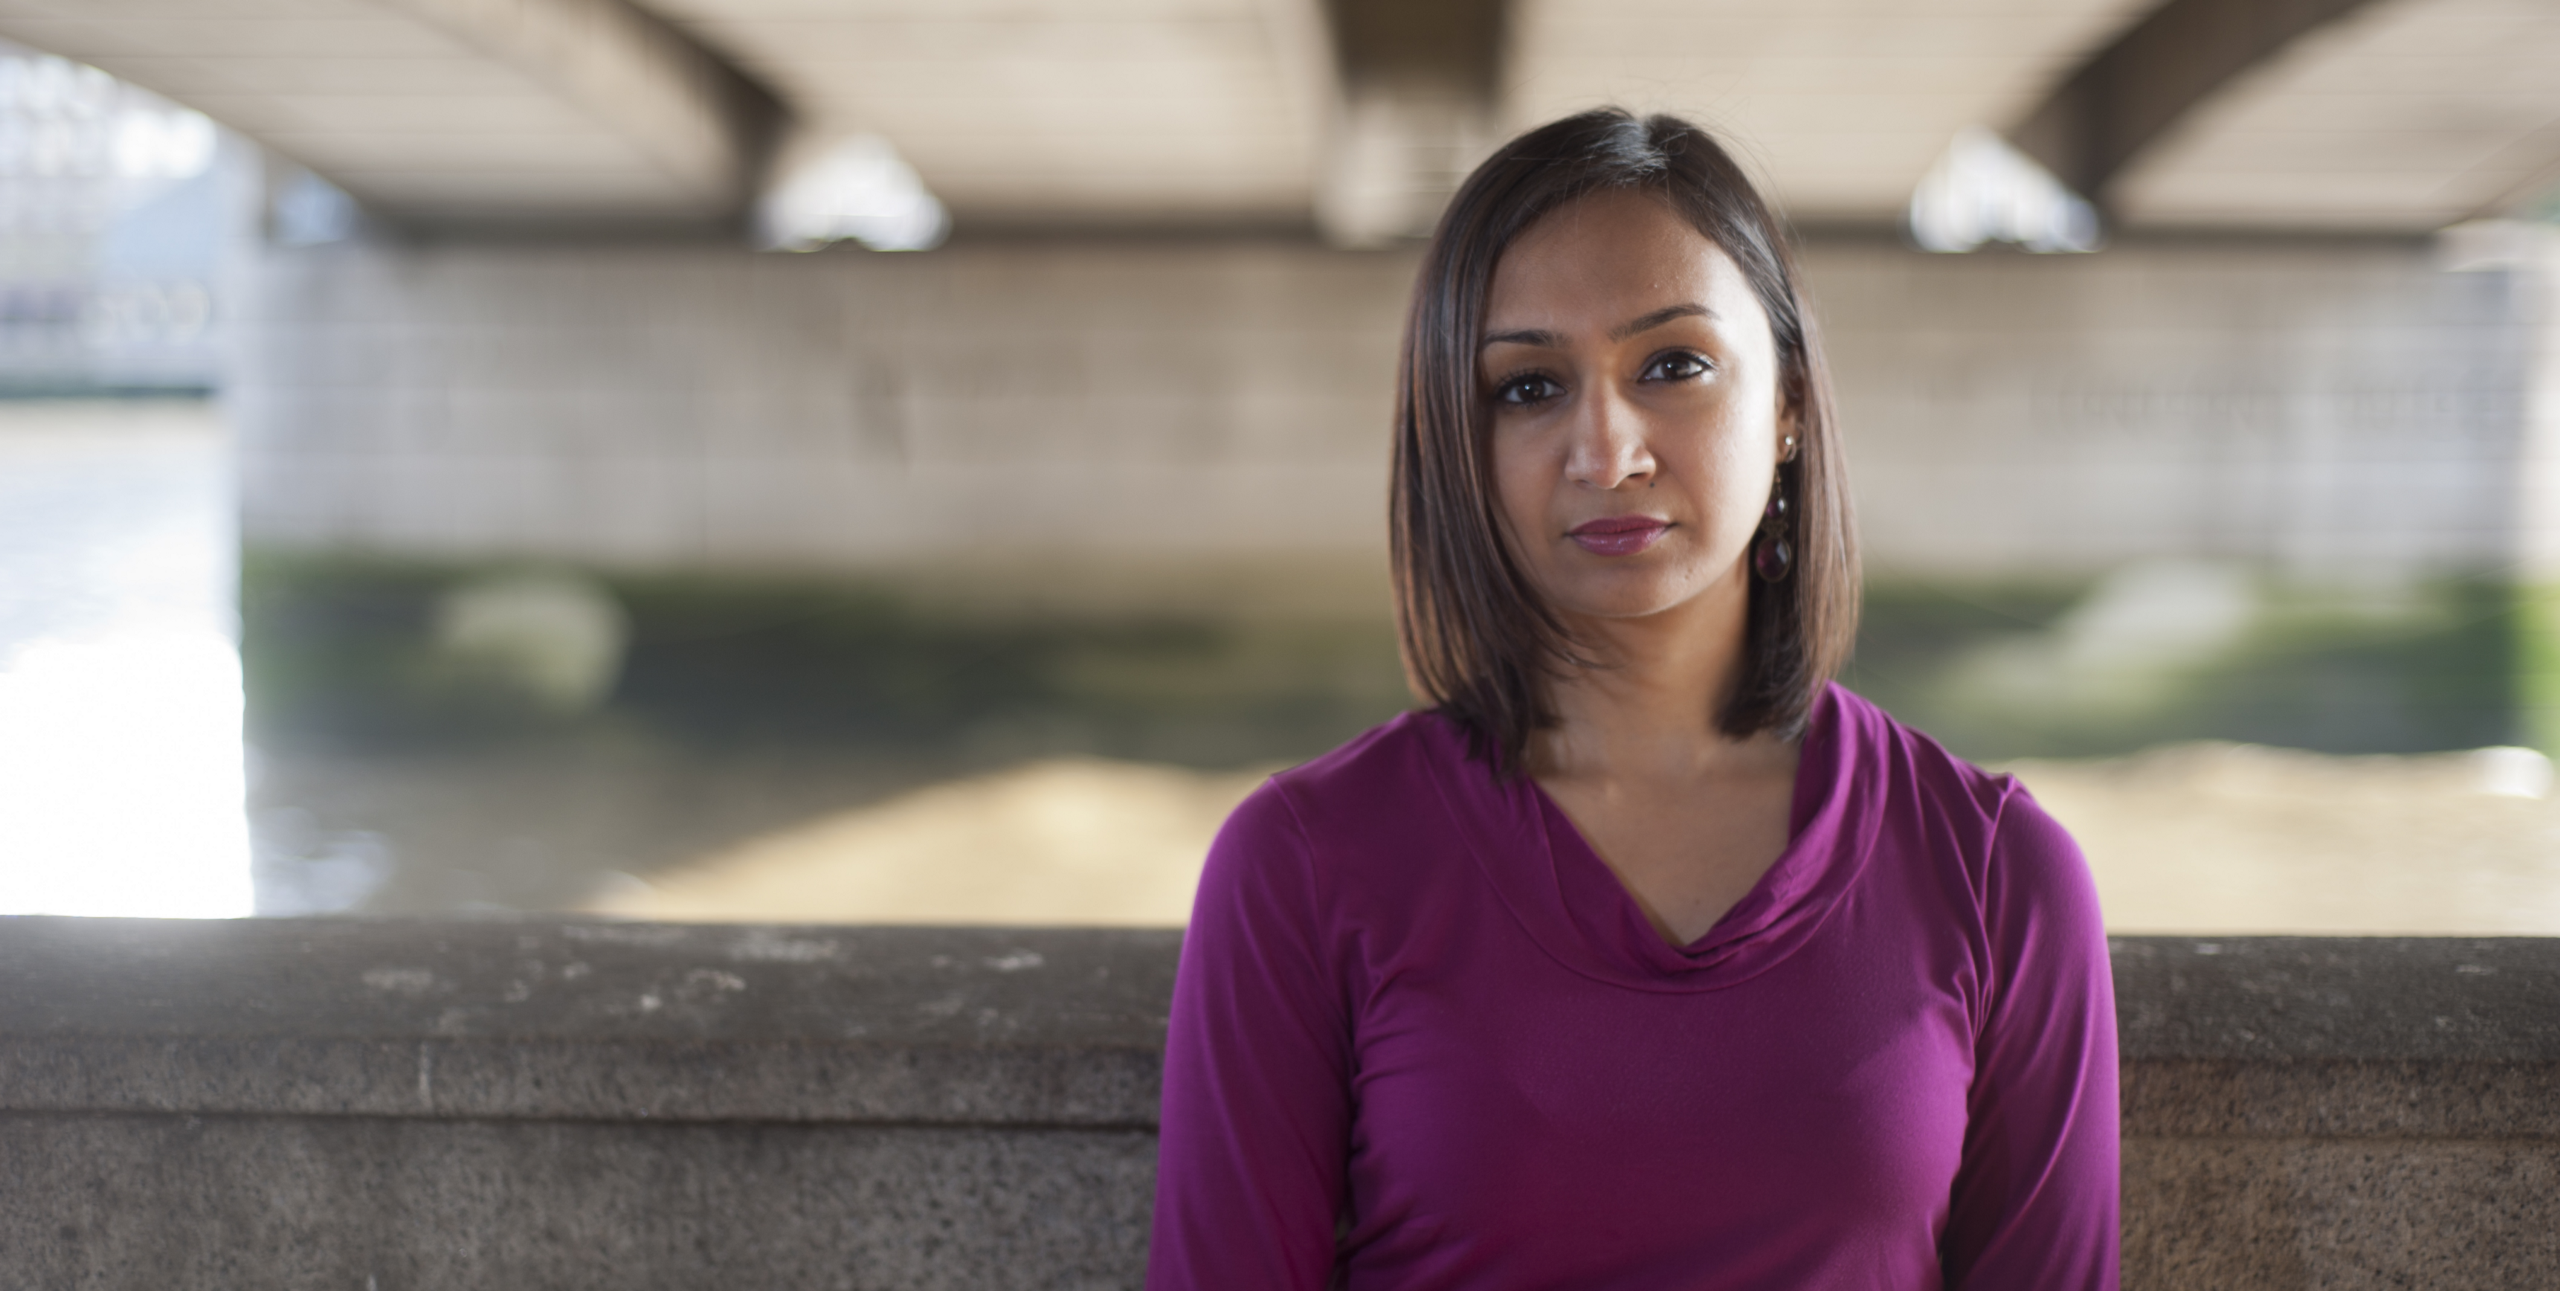 A woman in a purple shirt poses for the camera beneath a bridge.